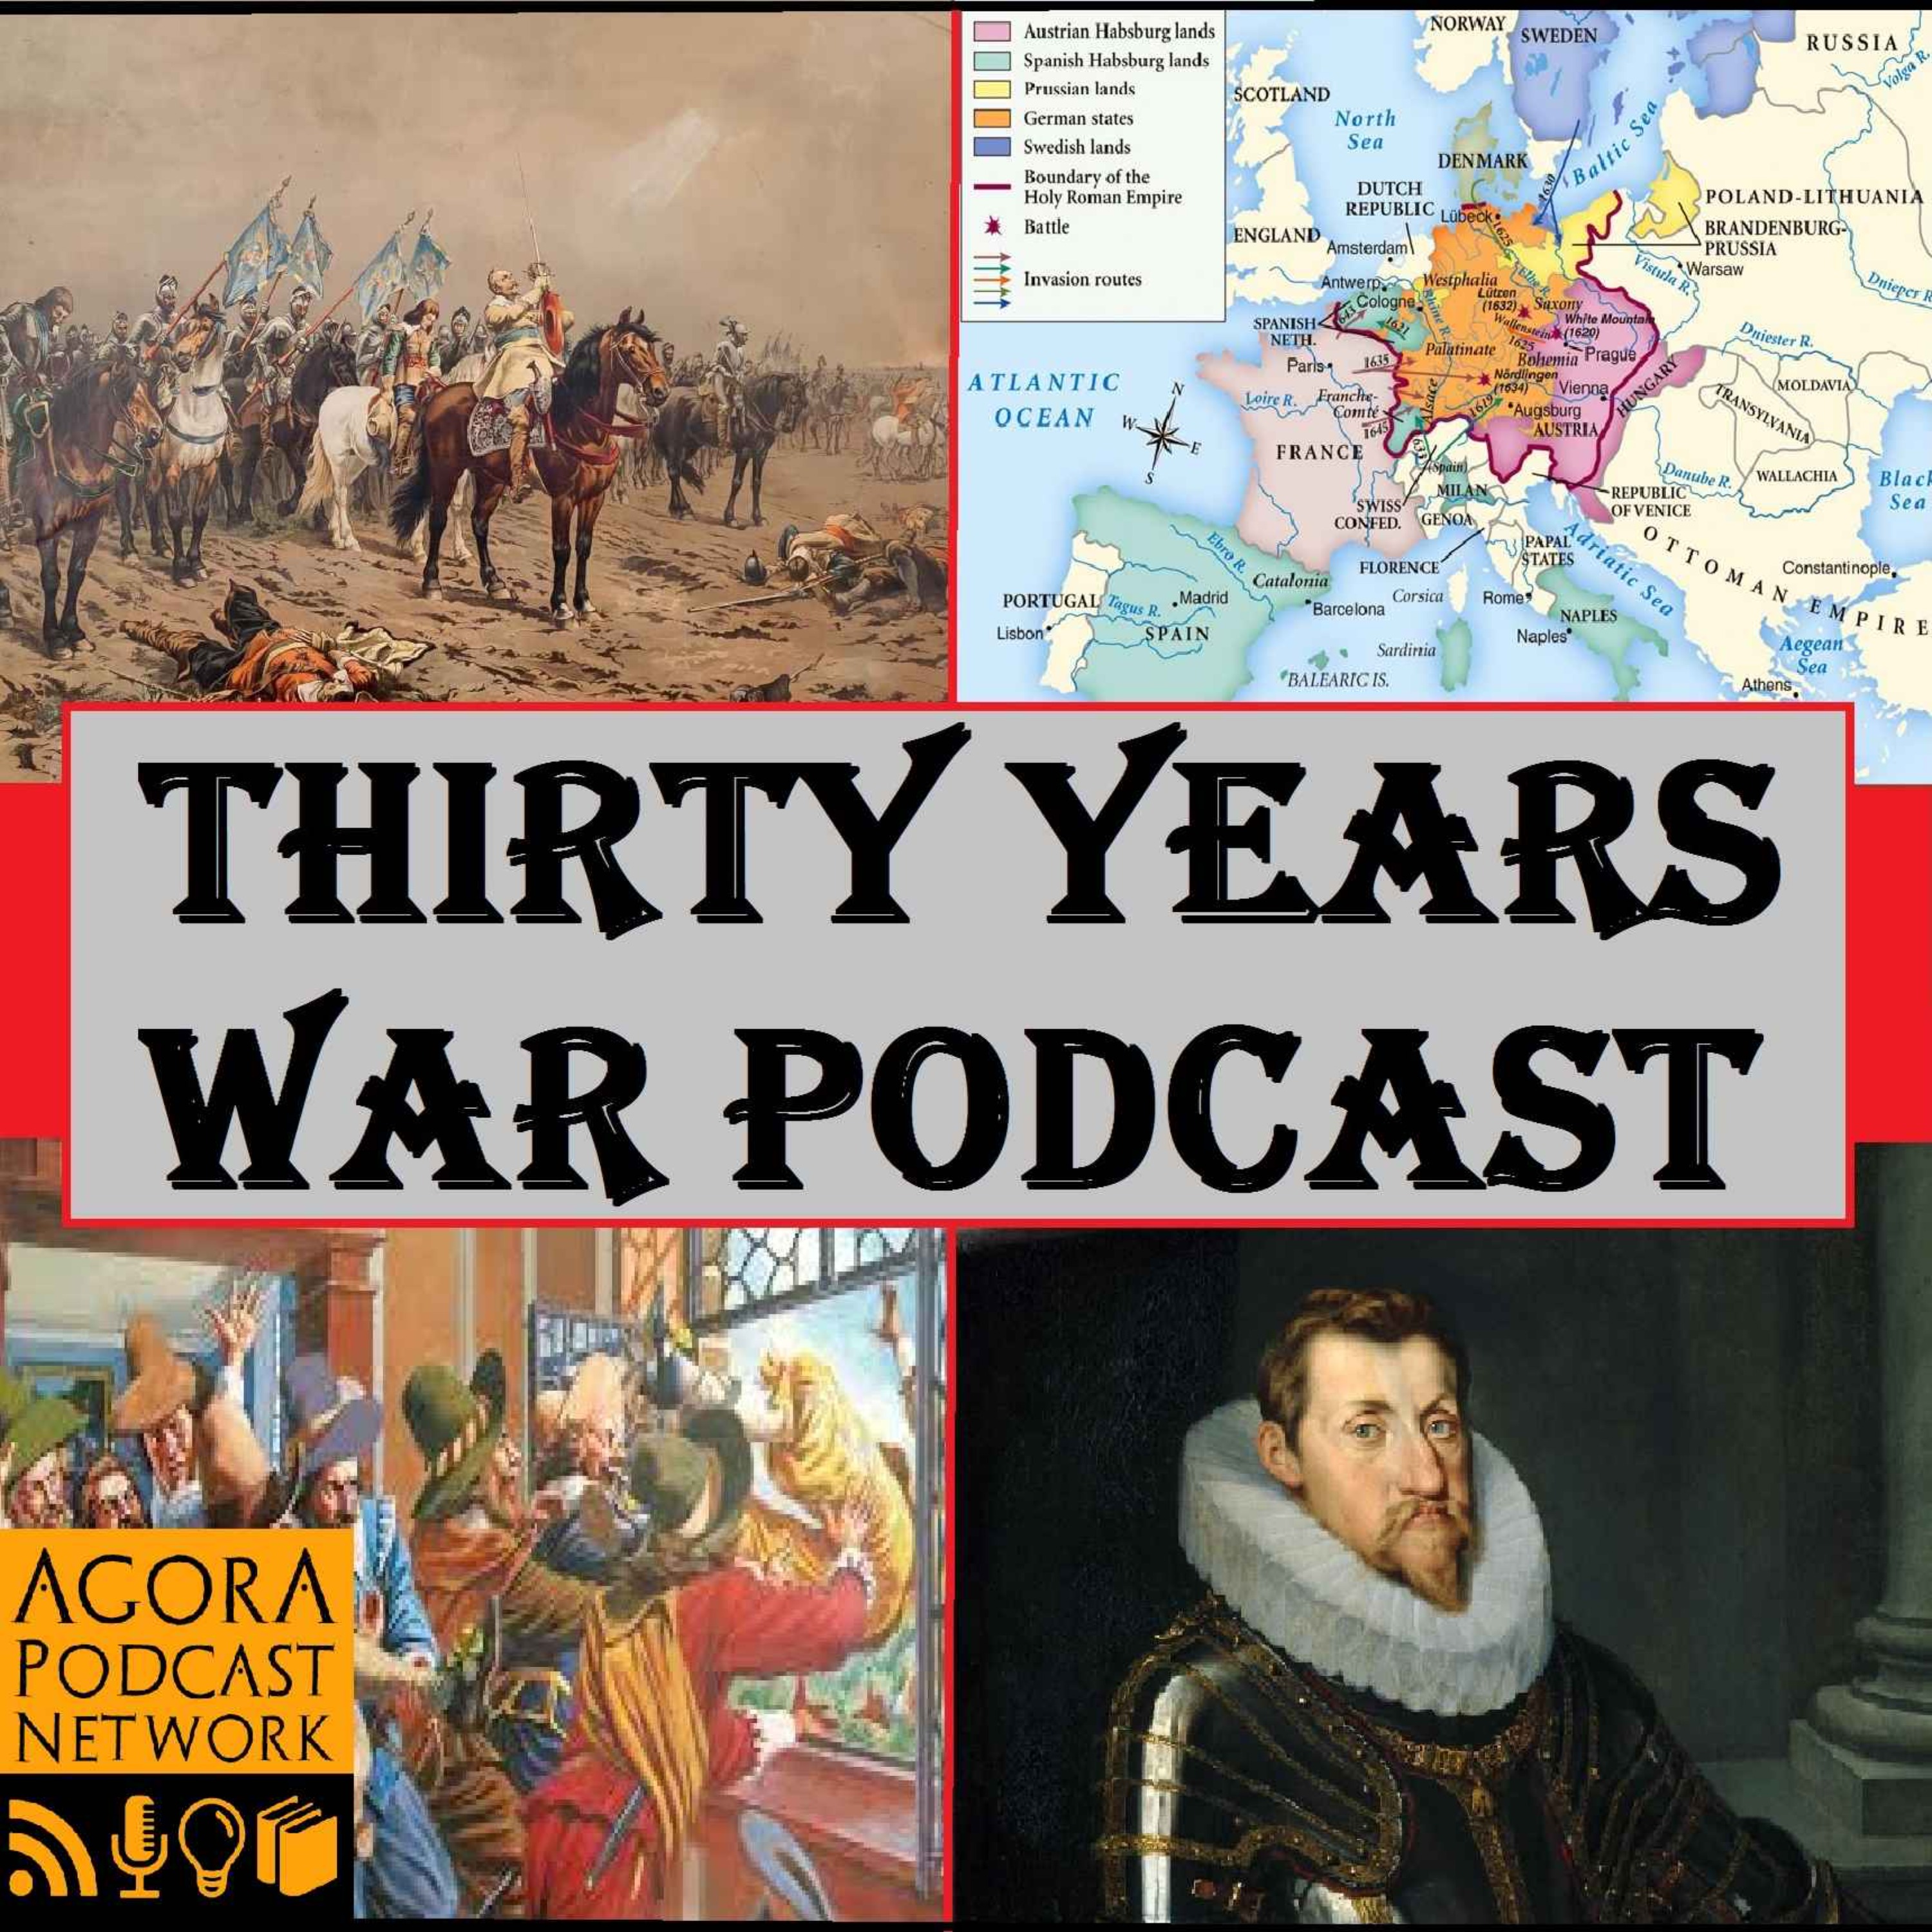 30YearsWar #81: The Last Campaign [1648]